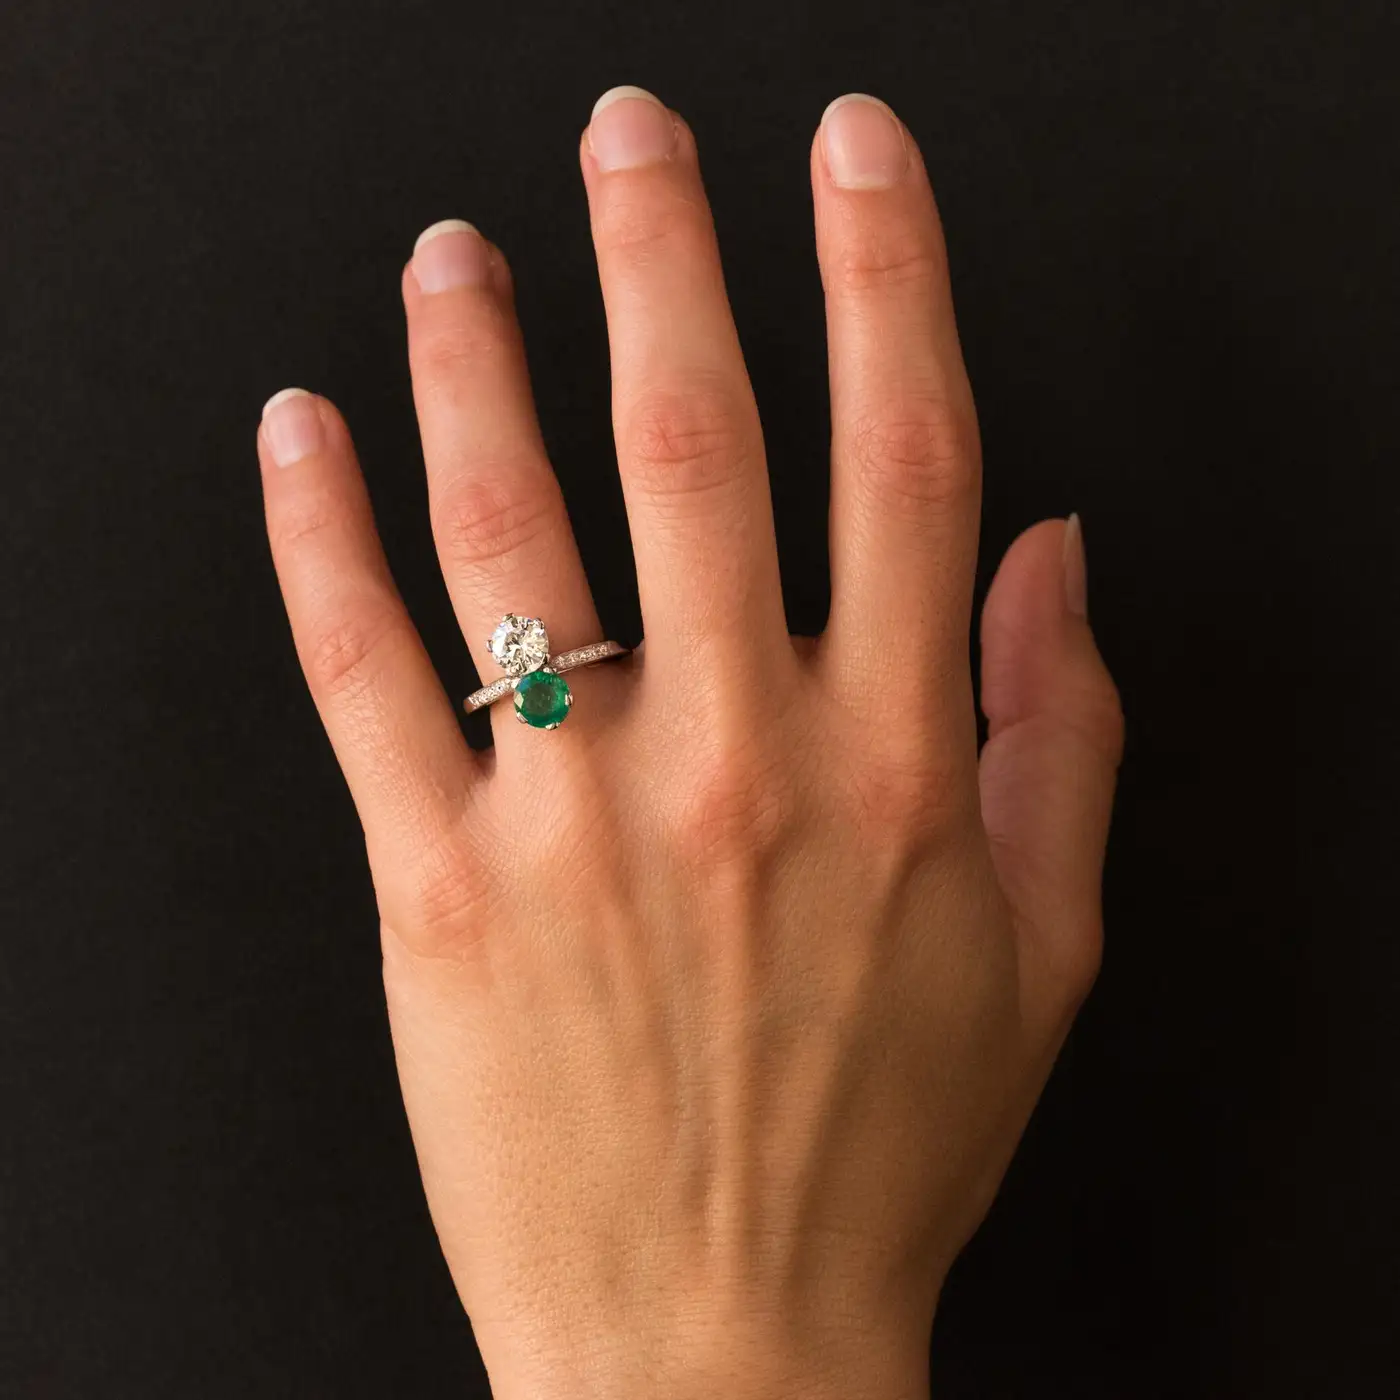 1930s-French-Platinum-Art-Deco-Emerald-Diamond-You-and-Me-Ring-6.webp